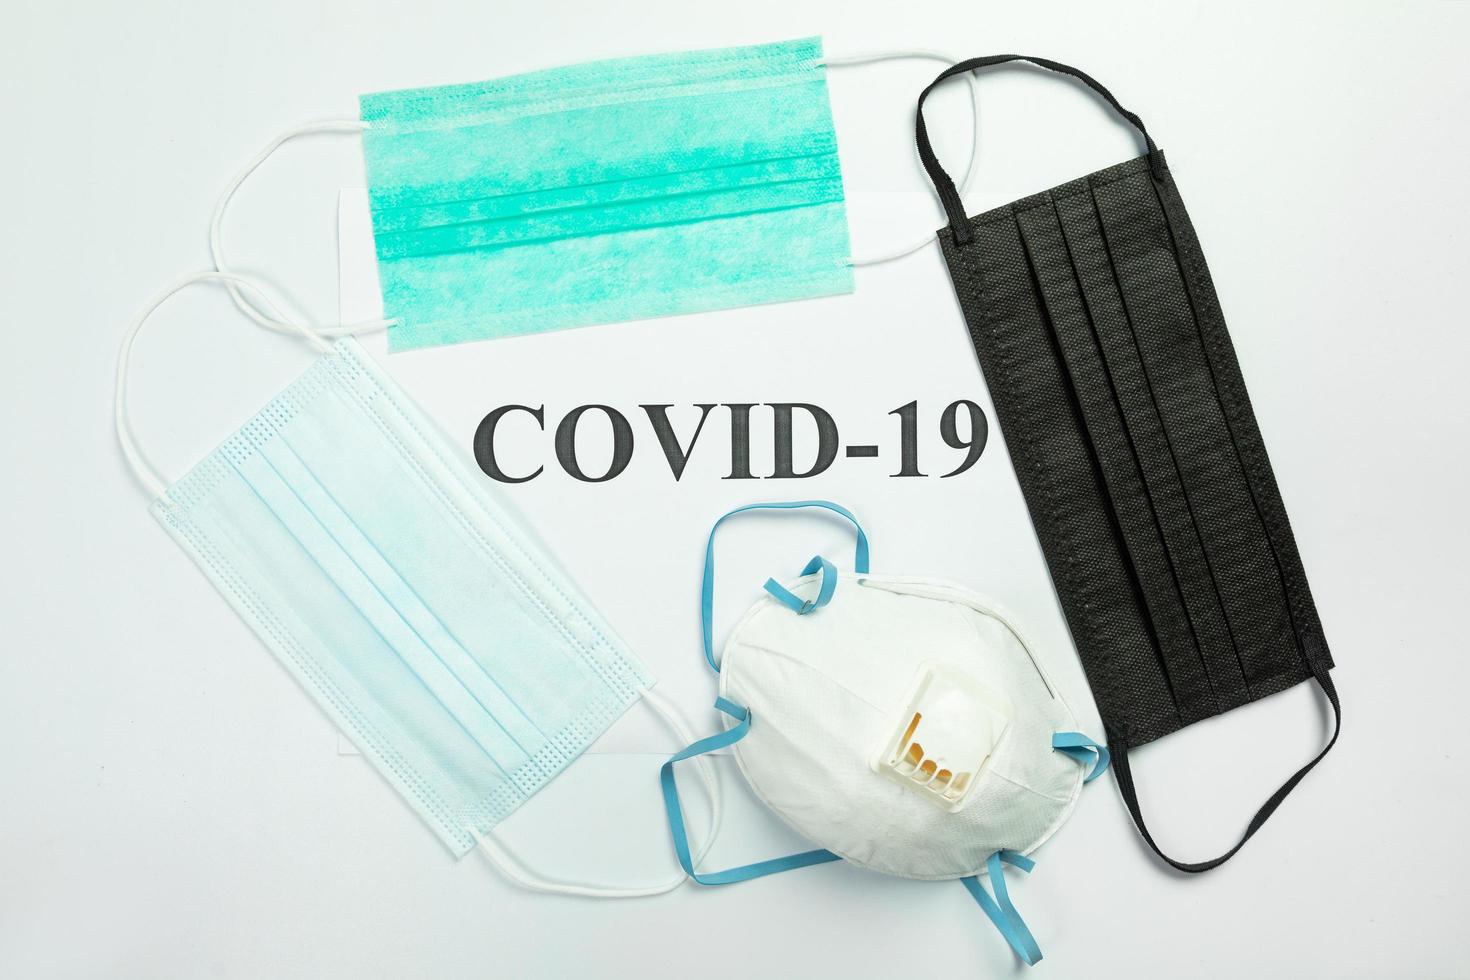 Medical protective masks on the table with COVID-19 word photo